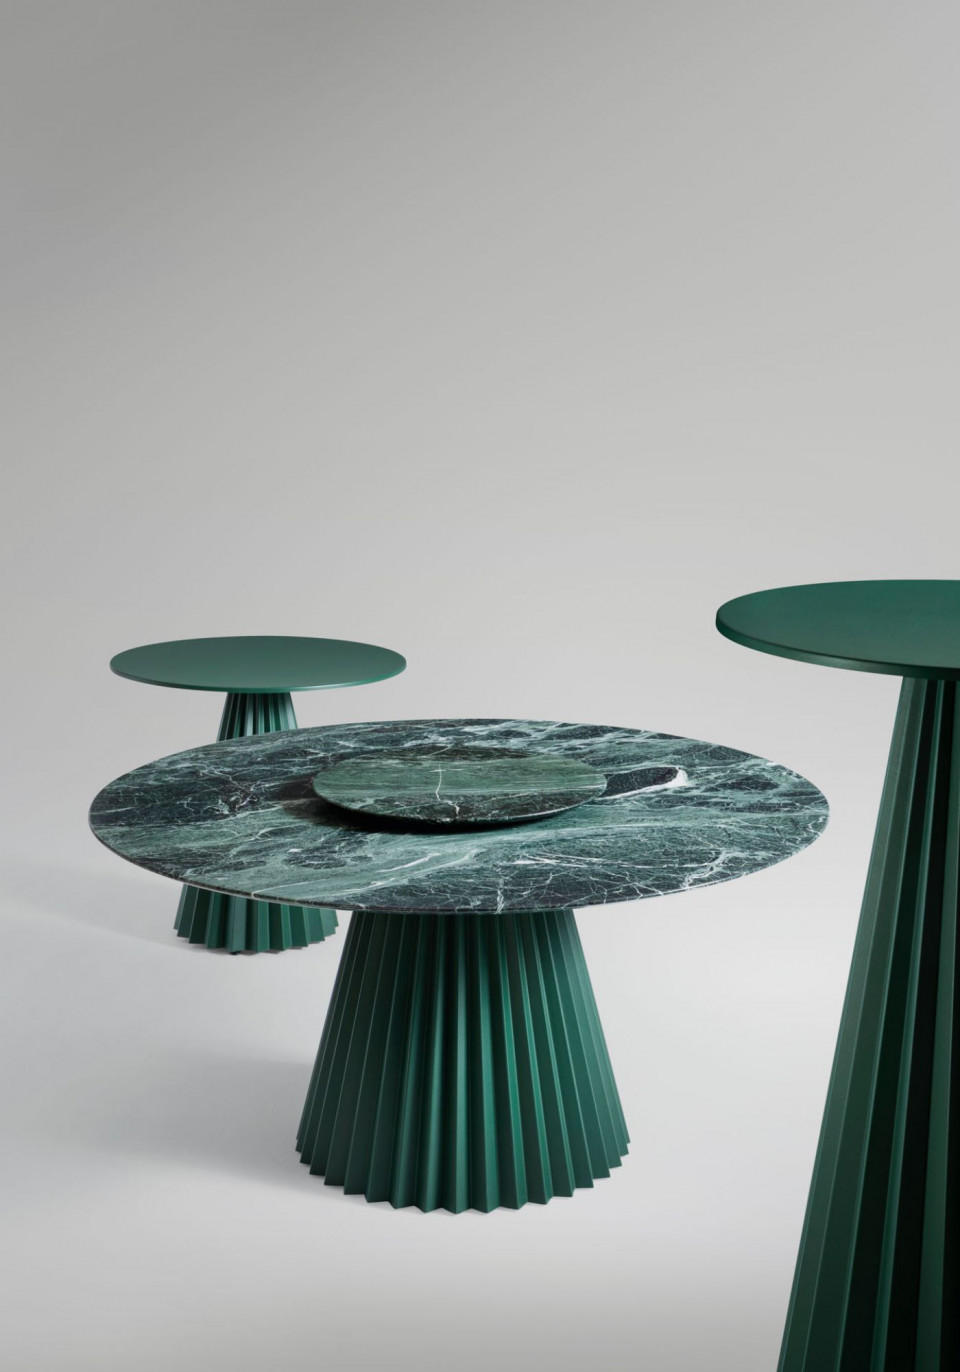 Plissé table in green metal, green tinos marble top